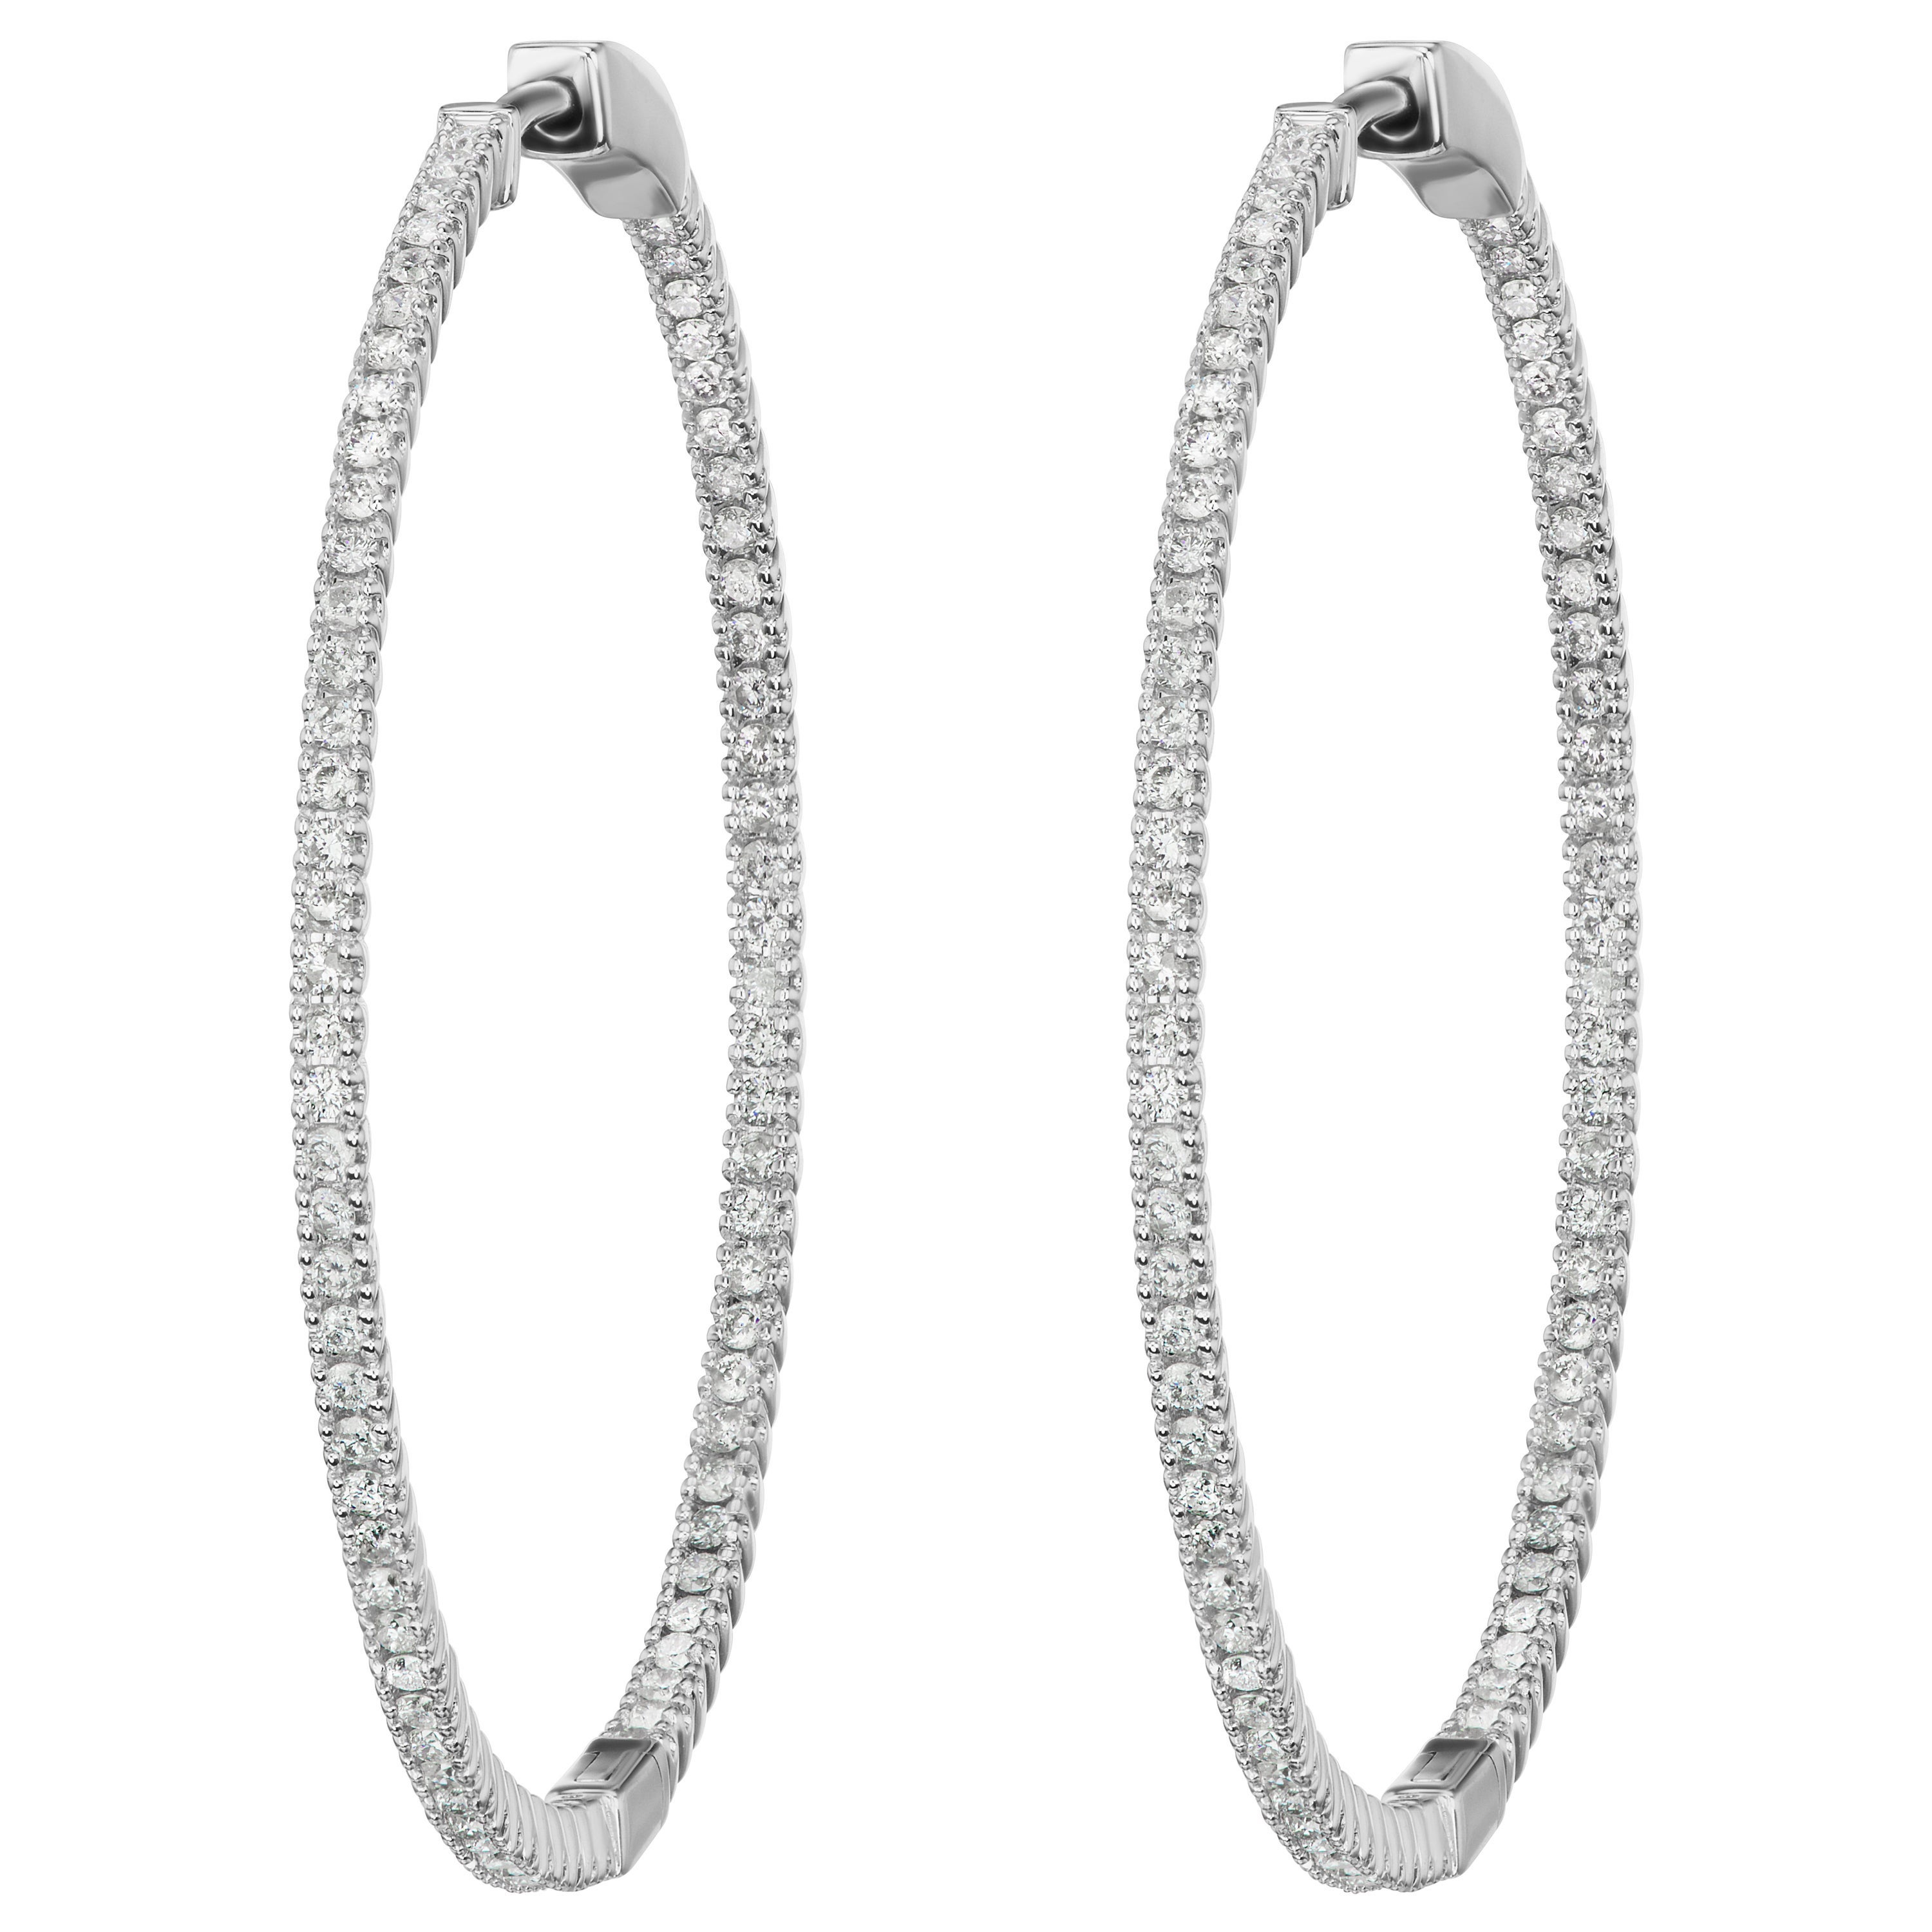 Luxle 1.15 Cts Pave Diamond Inside and Out Hoop Earrings 18 Karat White Gold